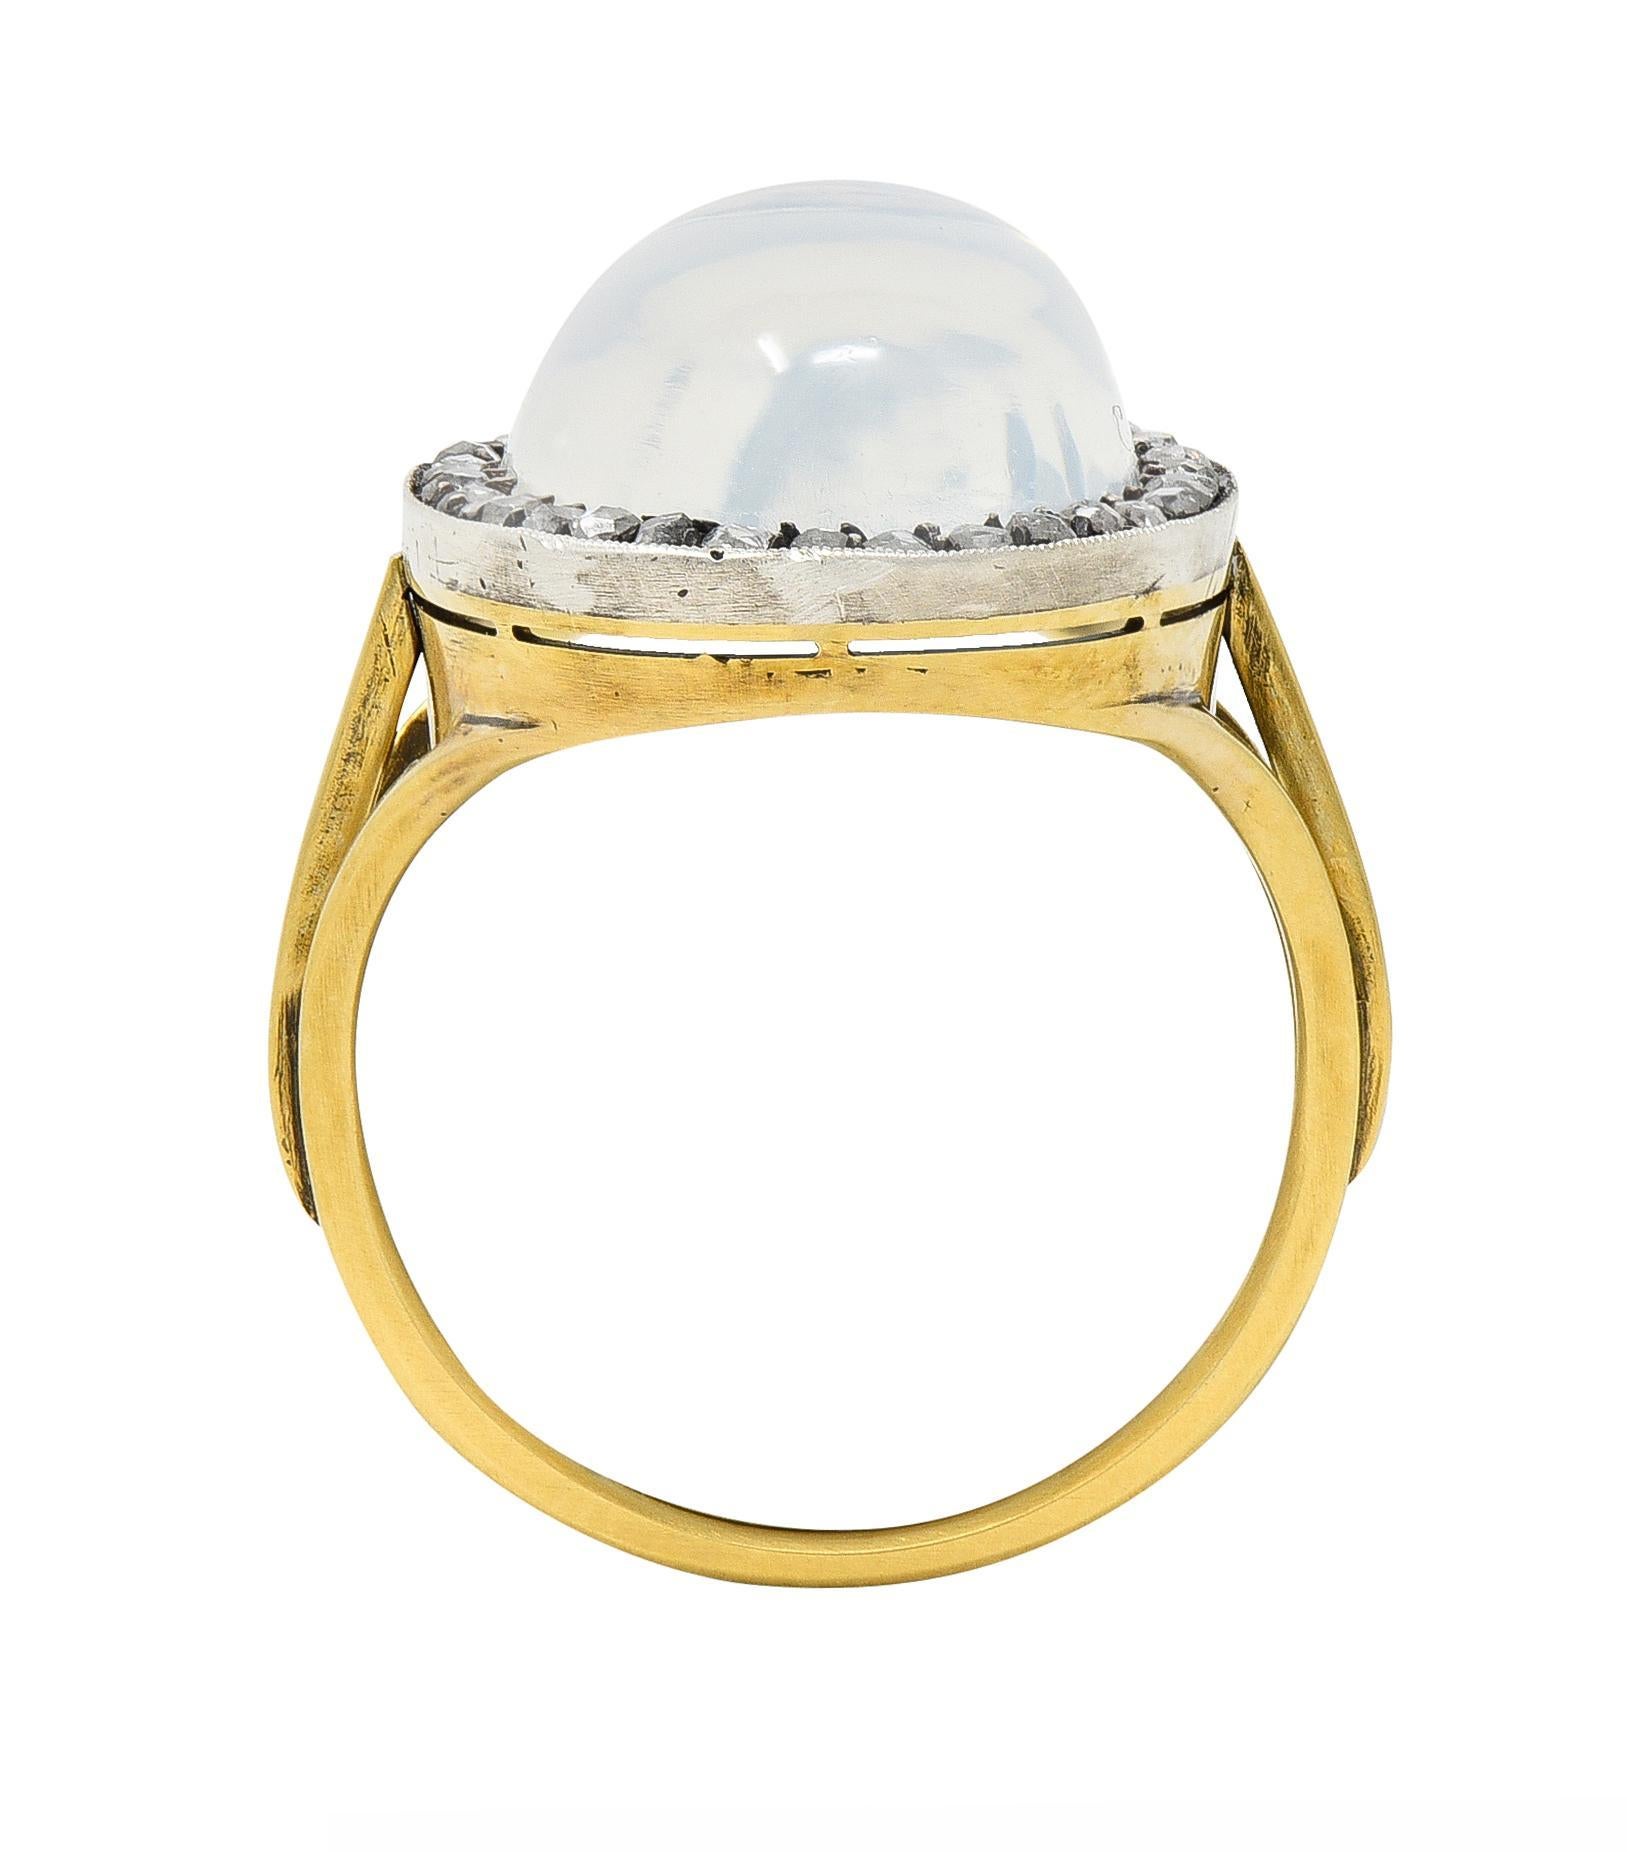 Moonstone Diamond Silver-Topped 18 Karat Yellow Gold Antique Ring For Sale 5